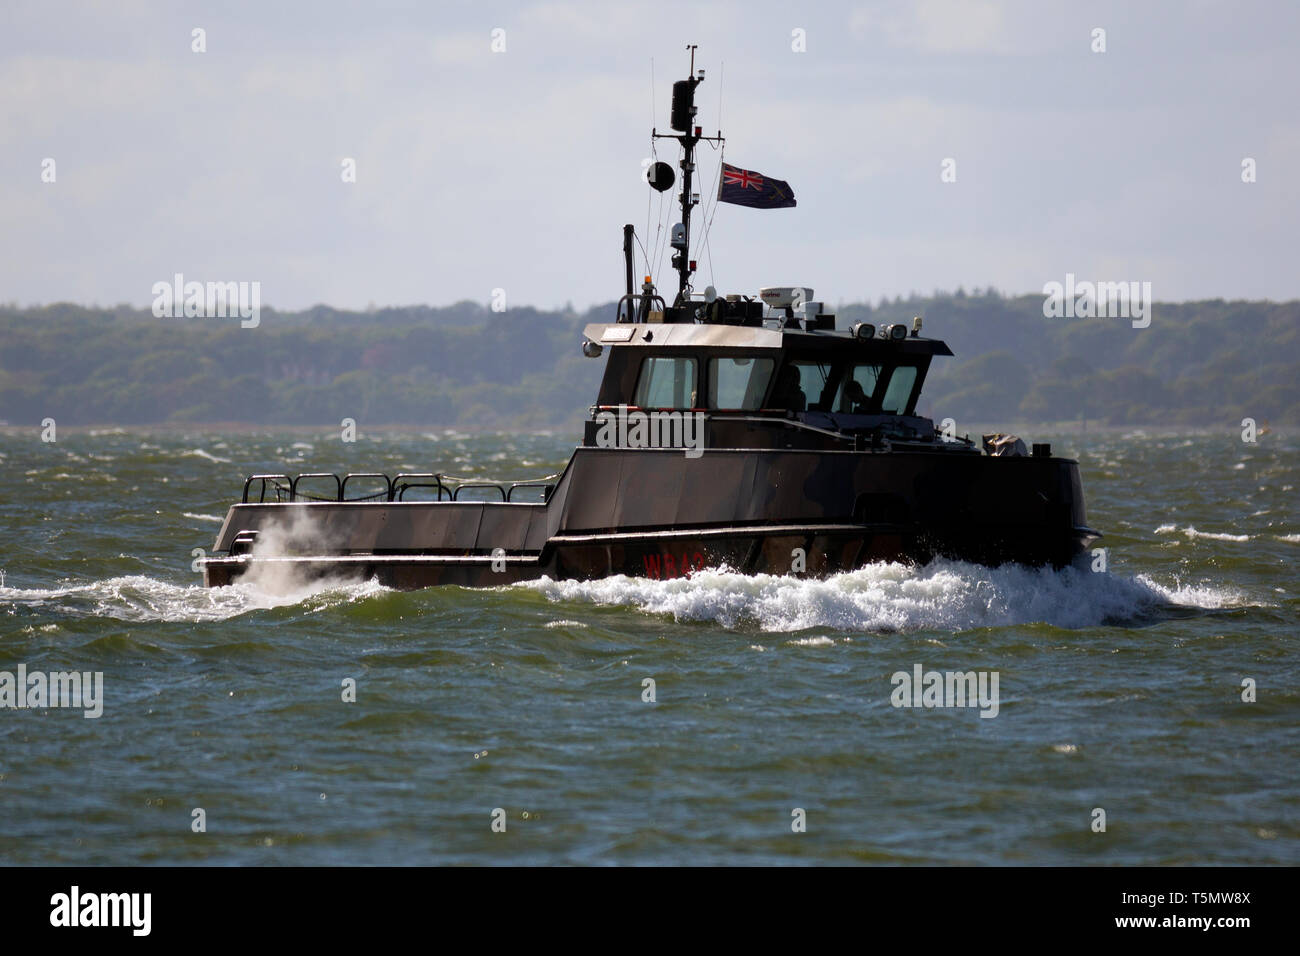 towing,tow,services,pulled,sideways,hawser,cable,tractor,schneider,power,system,Voith tractor tug,Southampton,Fawley,Oil Refinery,The Solent, Cowes, i Stock Photo